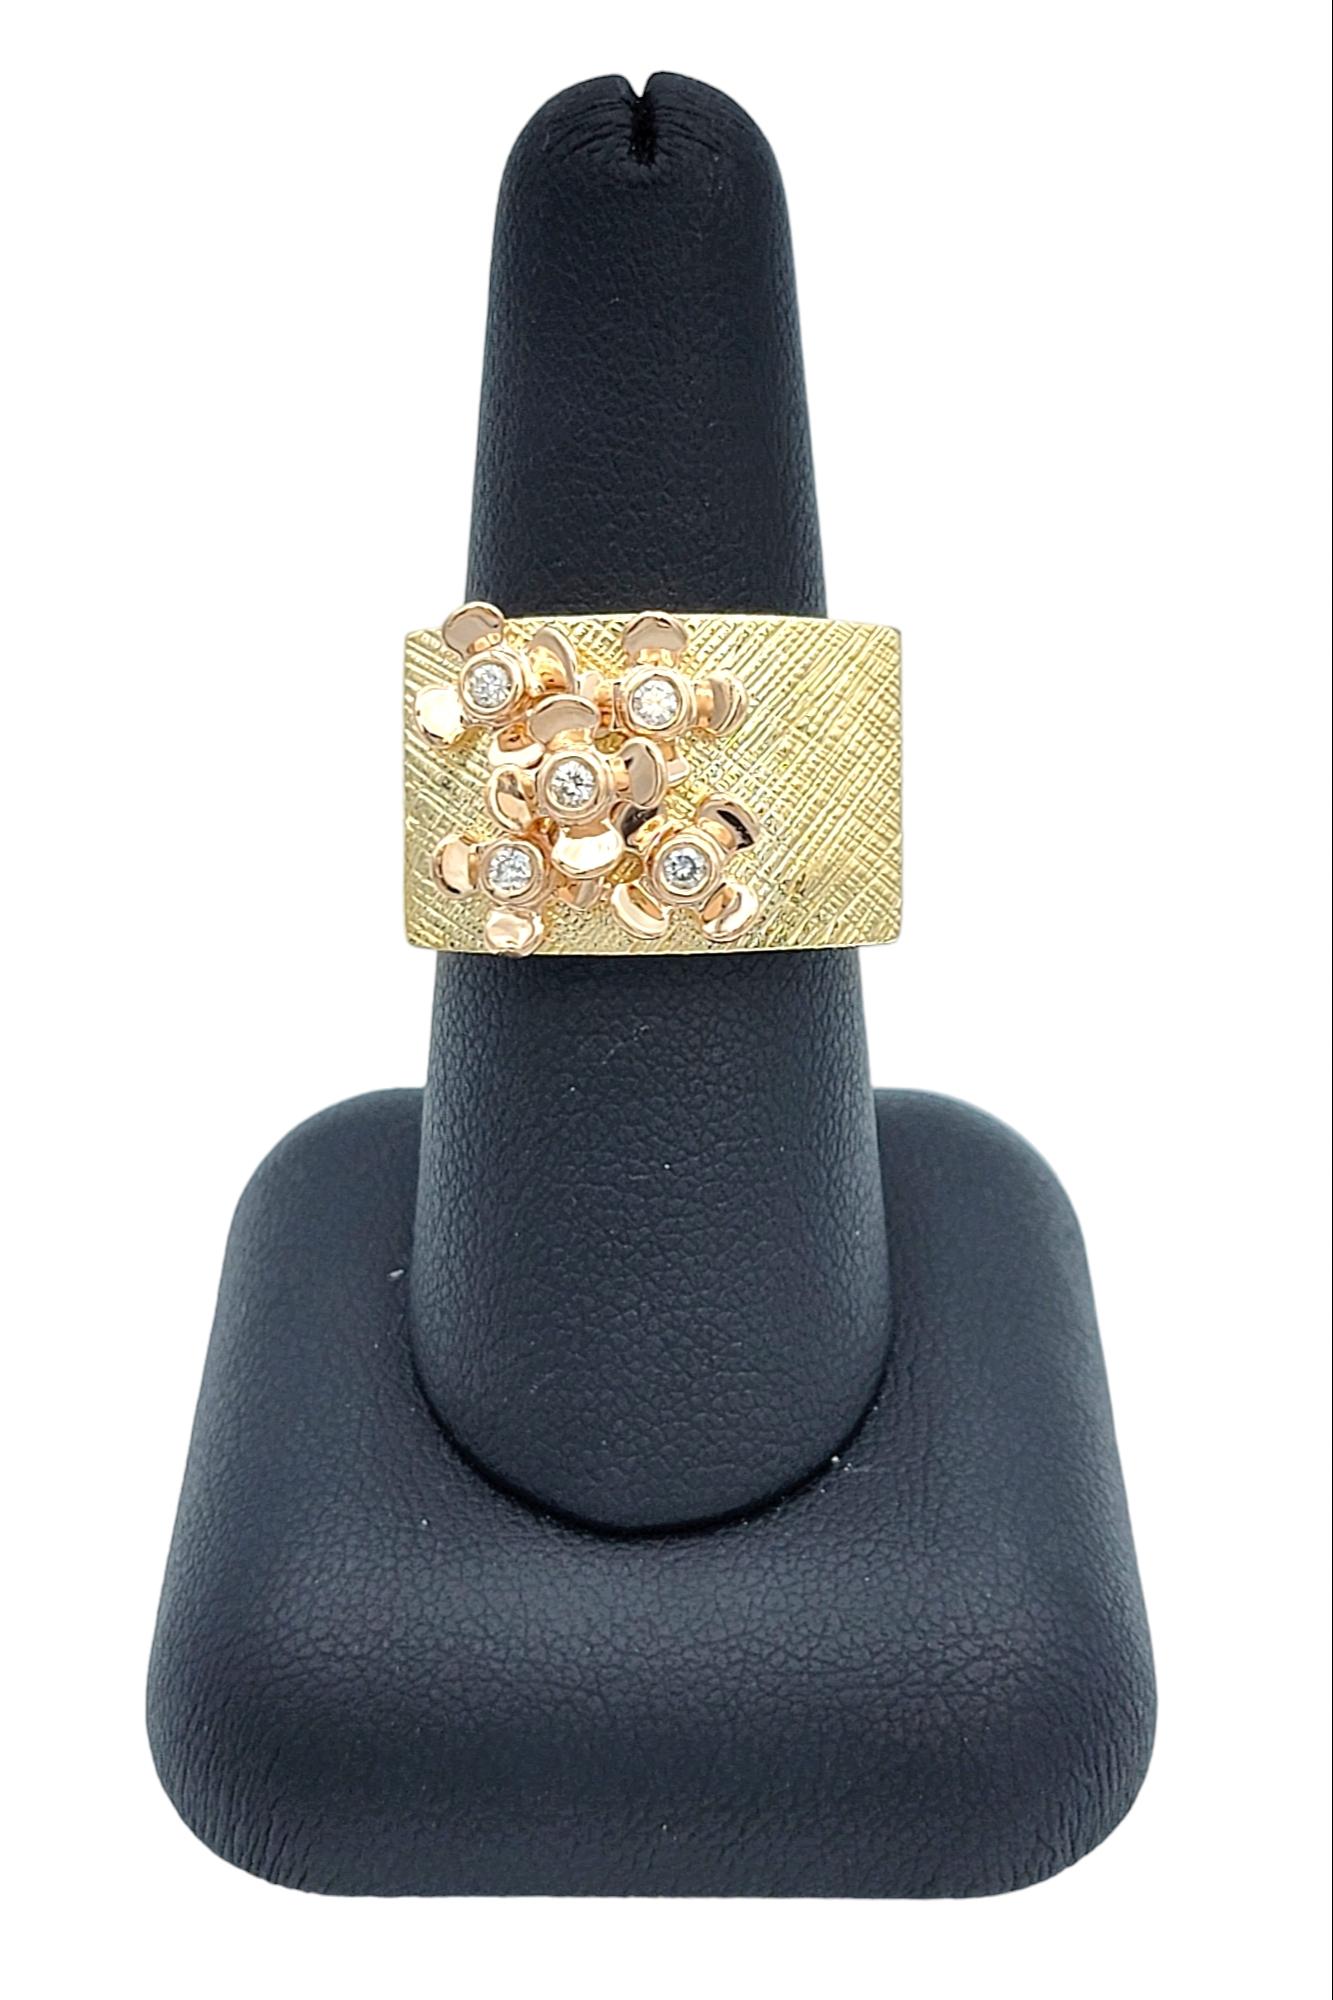 Sonia B. Designs Two-Tone Gold Cocktail Ring with Diamond Accented Flower Motif For Sale 3